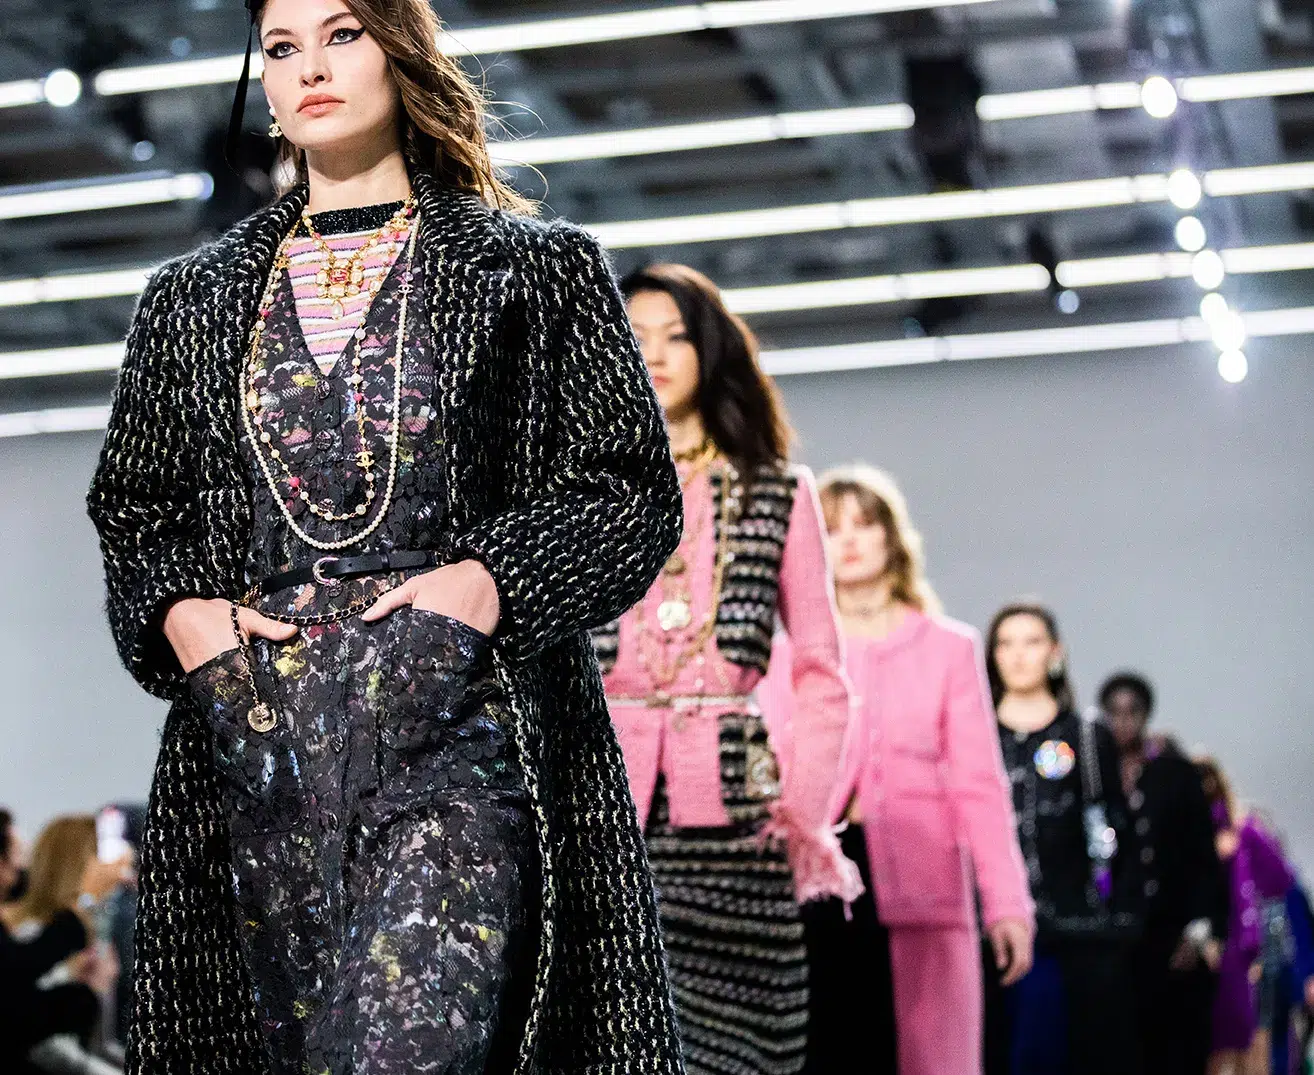 The next Chanel Métiers d’Art show will be in Manchester